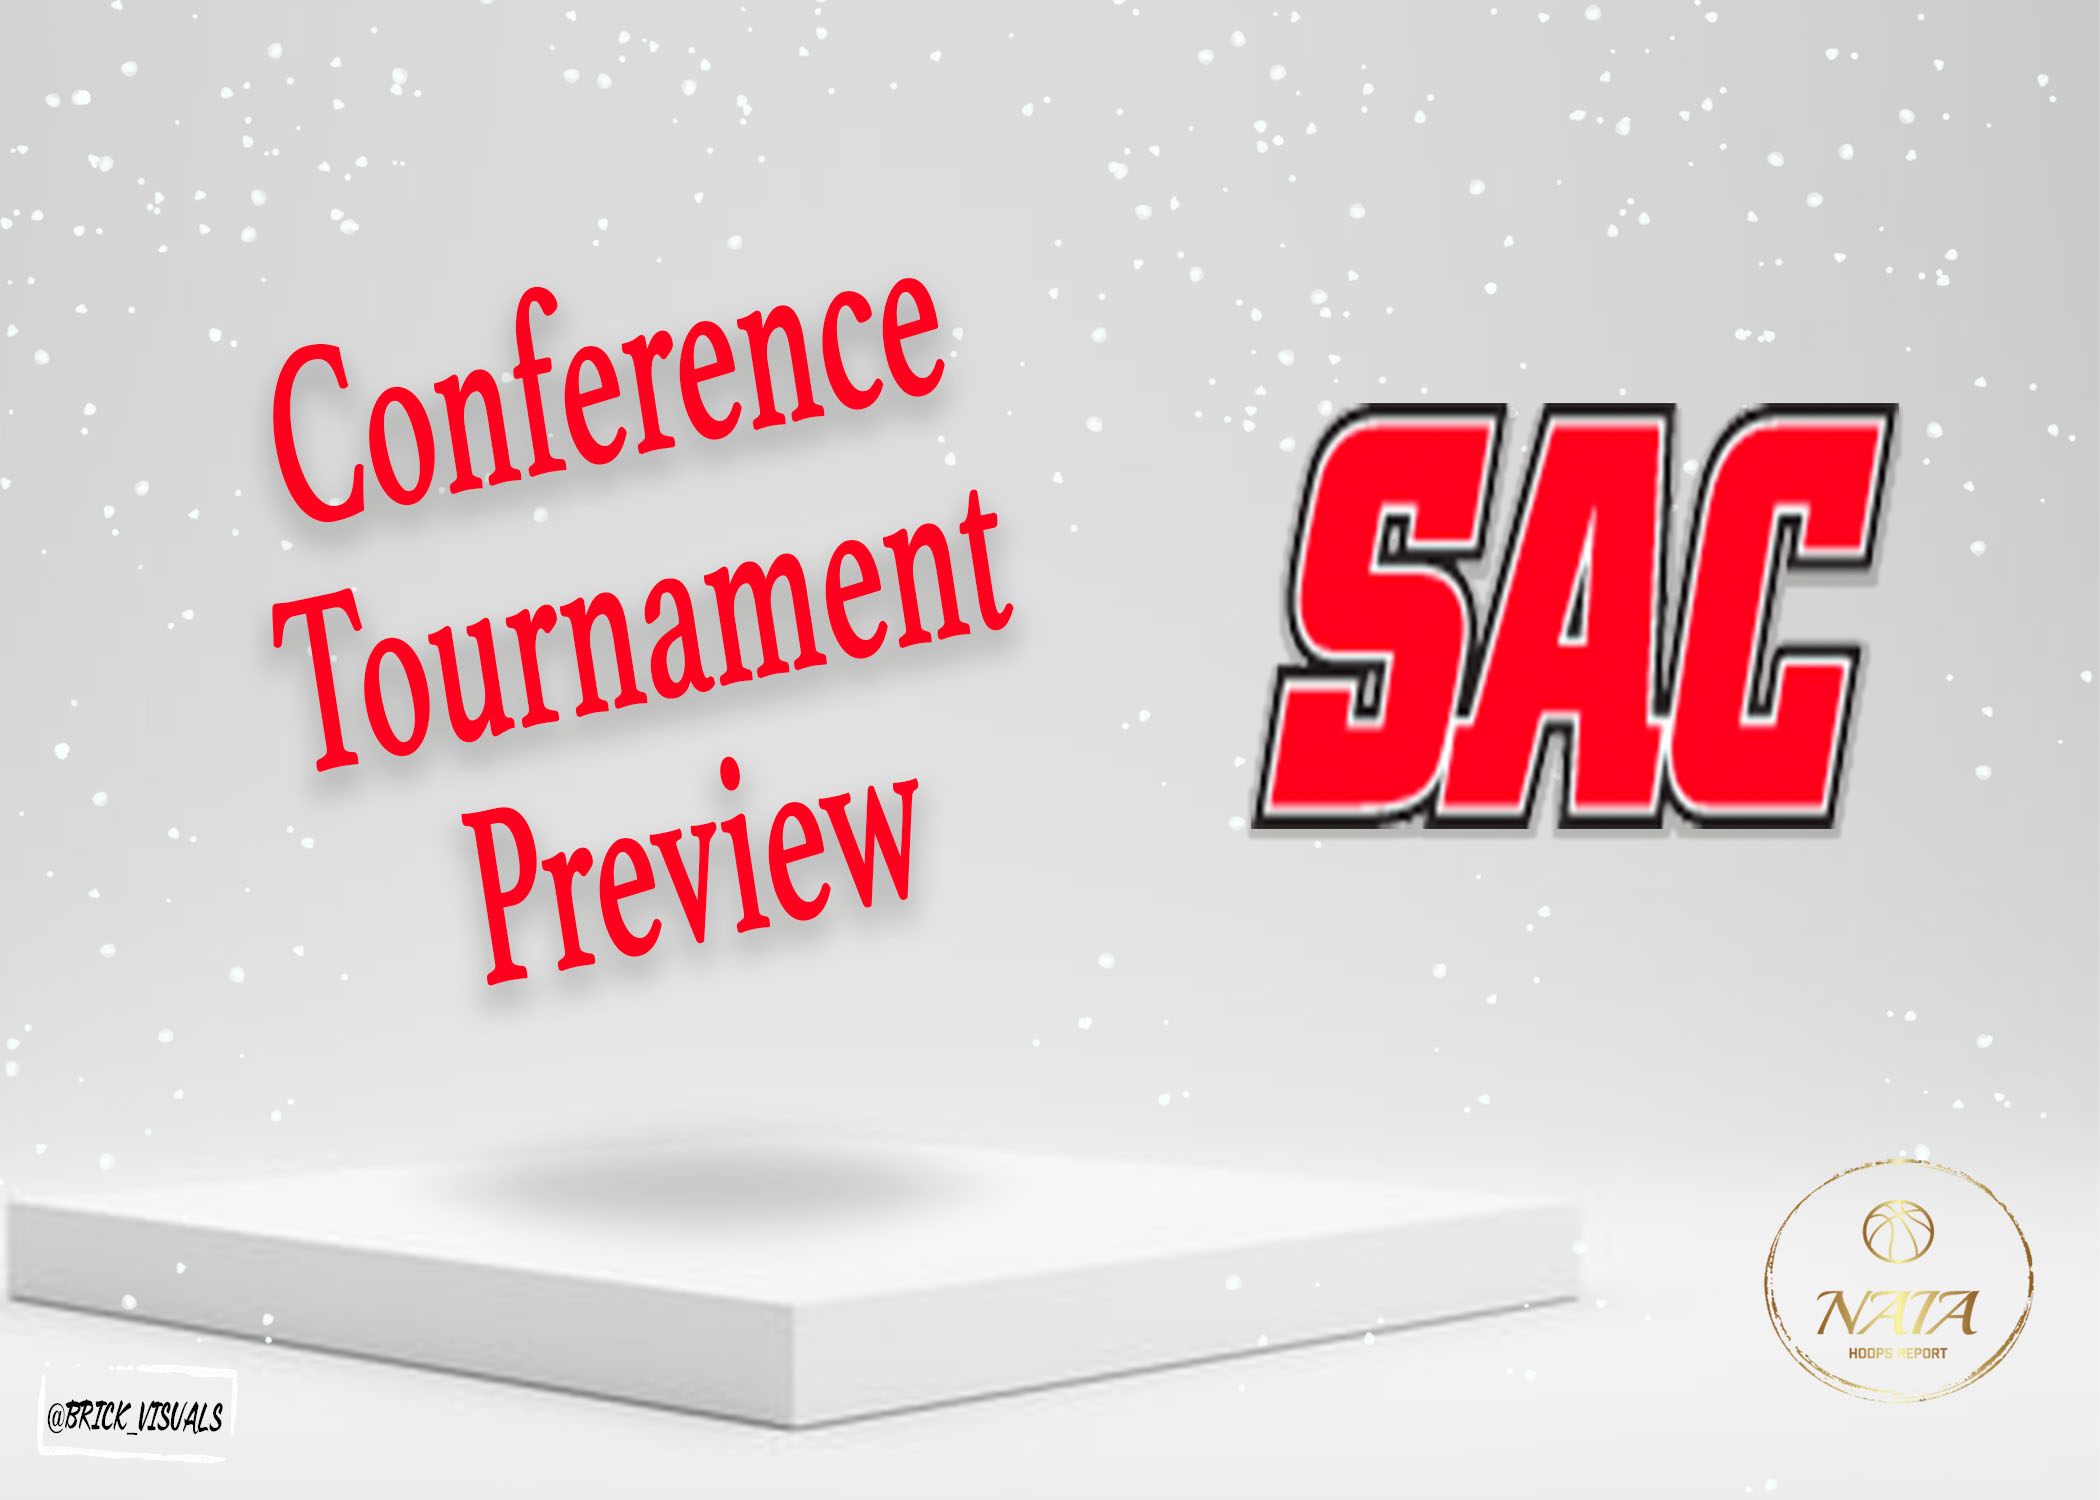 Sooner Athletic Conference Tournament Preview